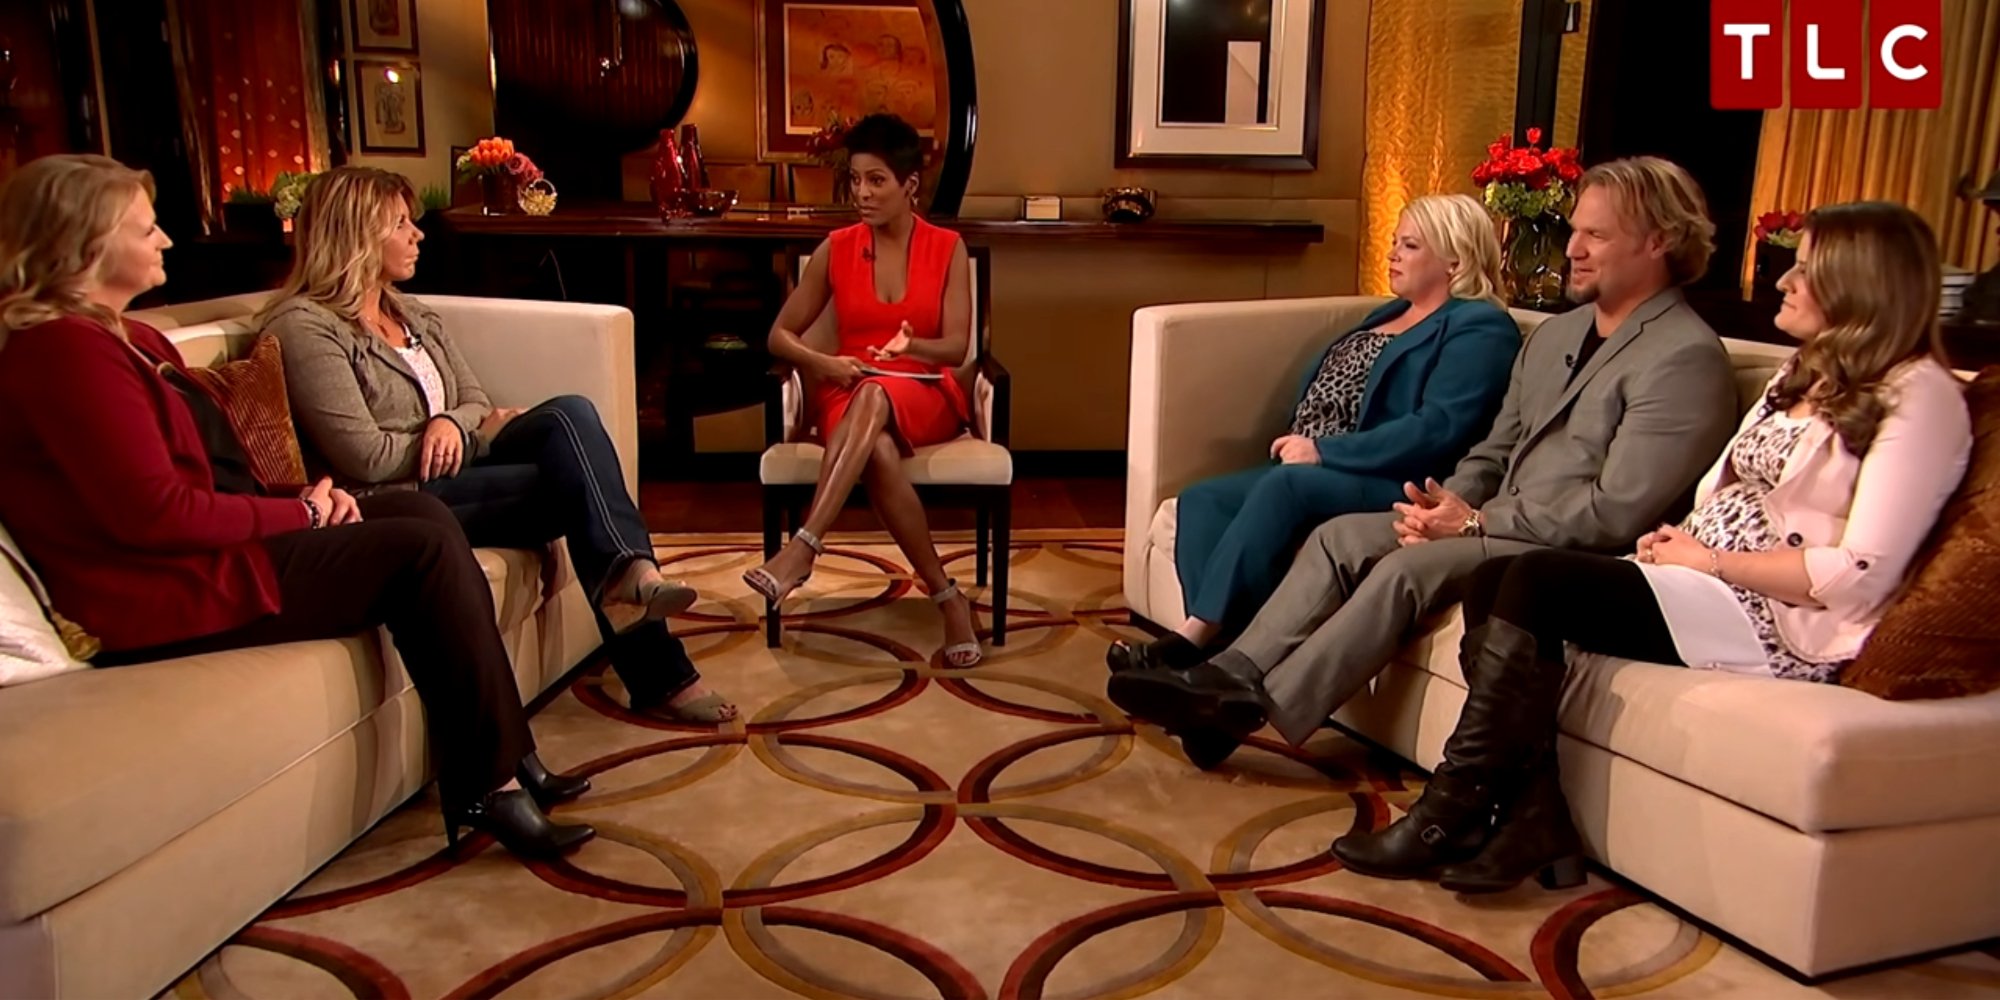 Tamron Hall and the cast of TLC's 'Sister Wives' during the 2015 tell-all.